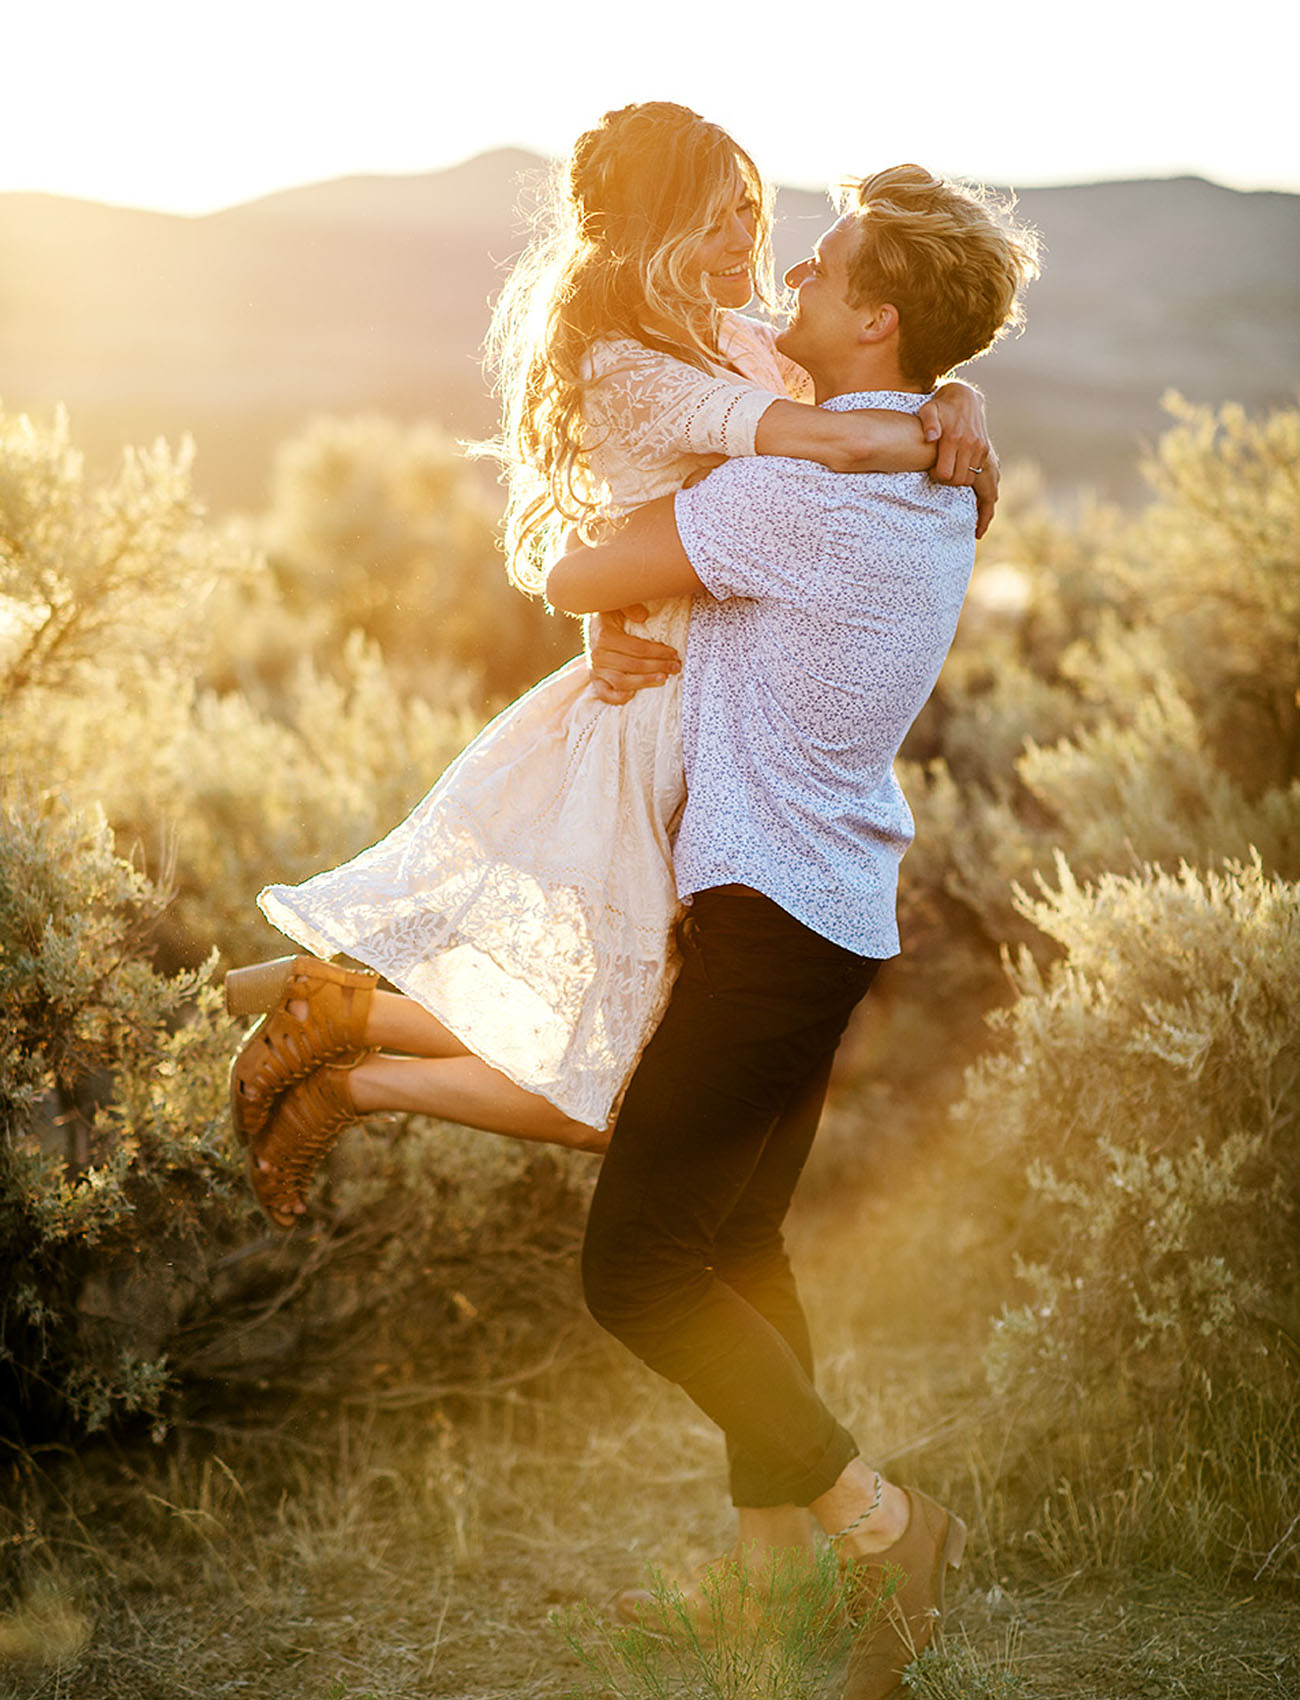 10 Essential Shots to Get During Your Engagement Session